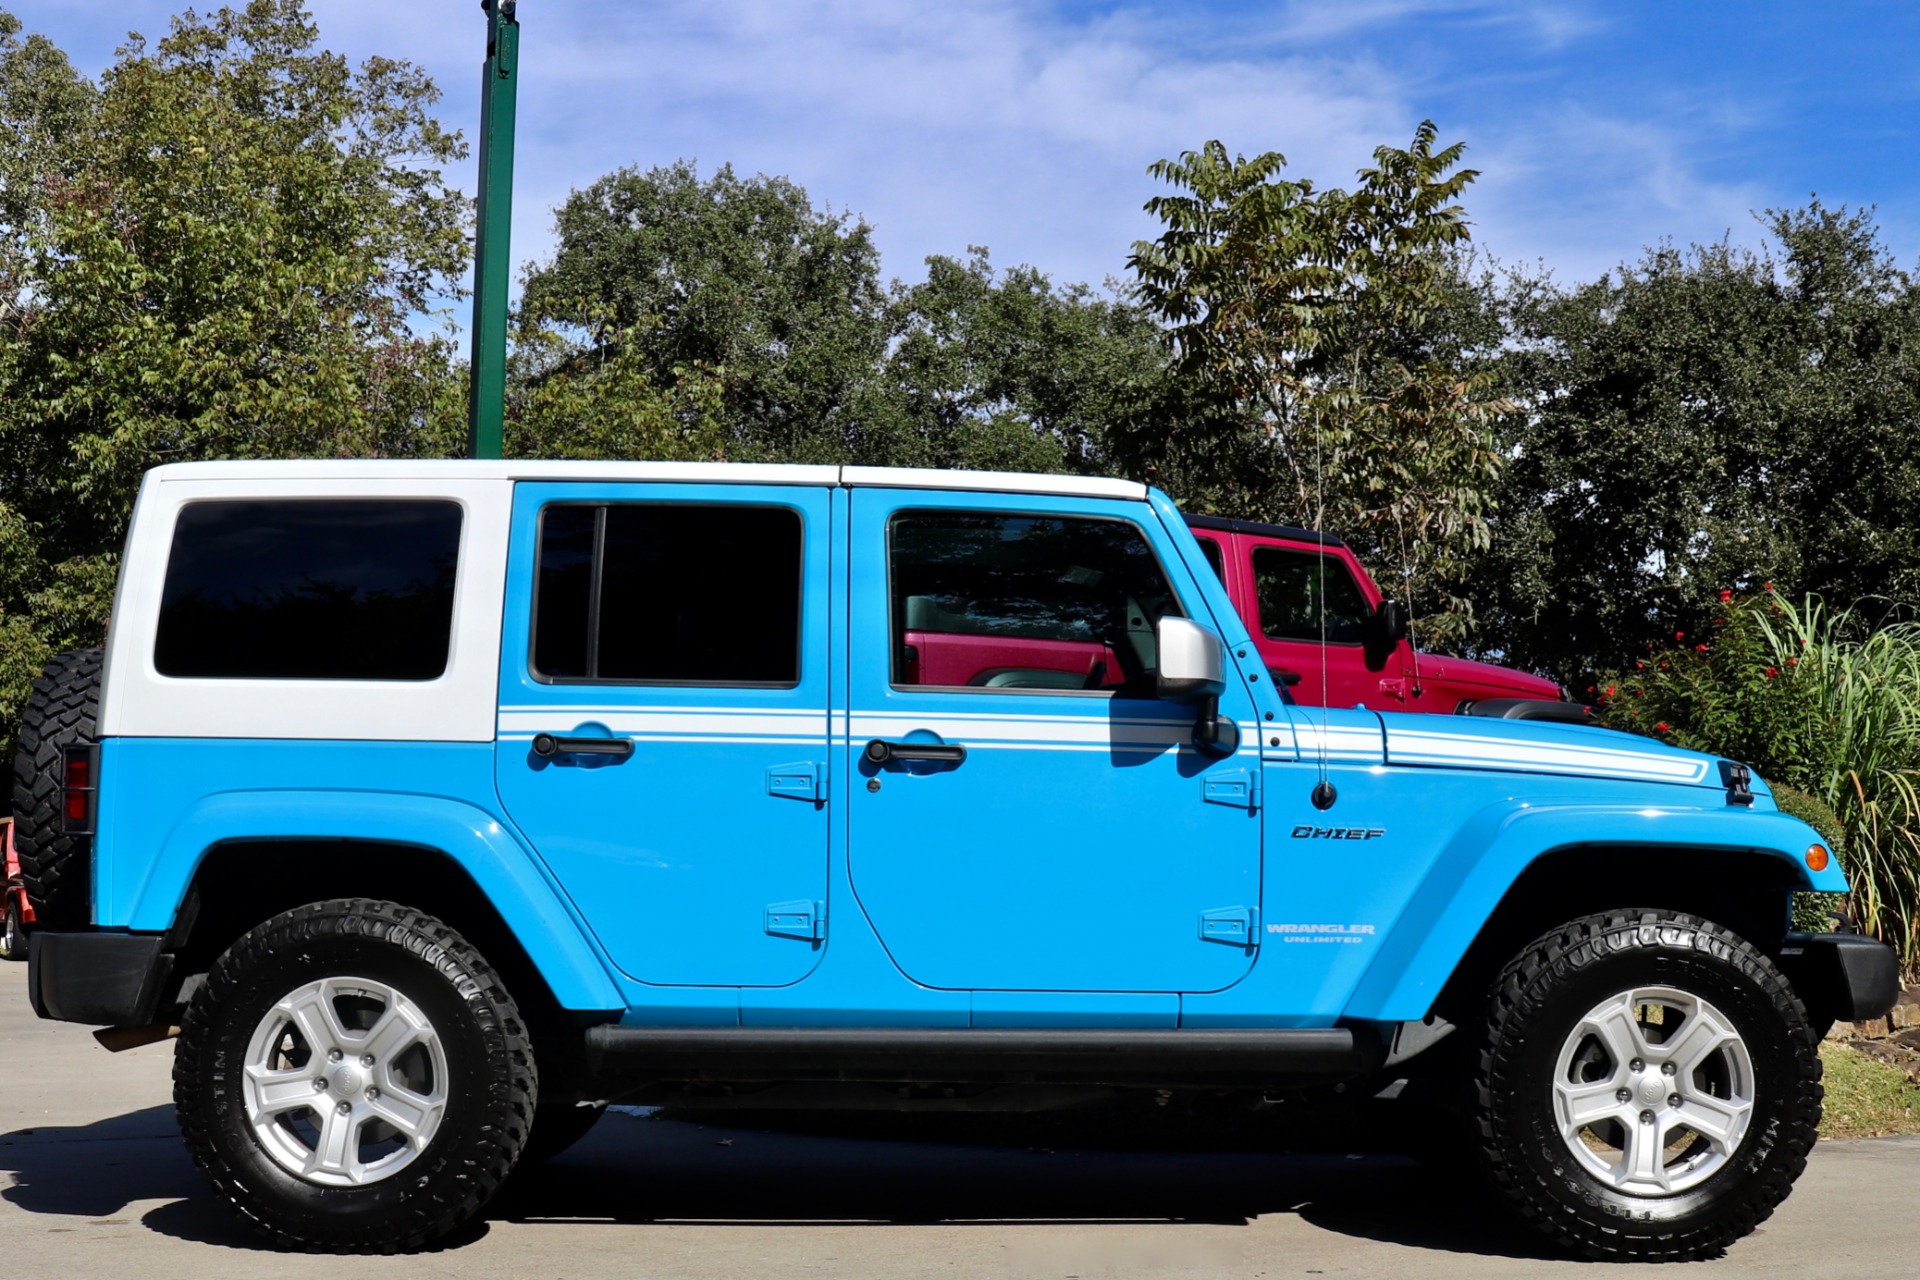 Used-2017-Jeep-Wrangler-Unlimited-Chief-Edition